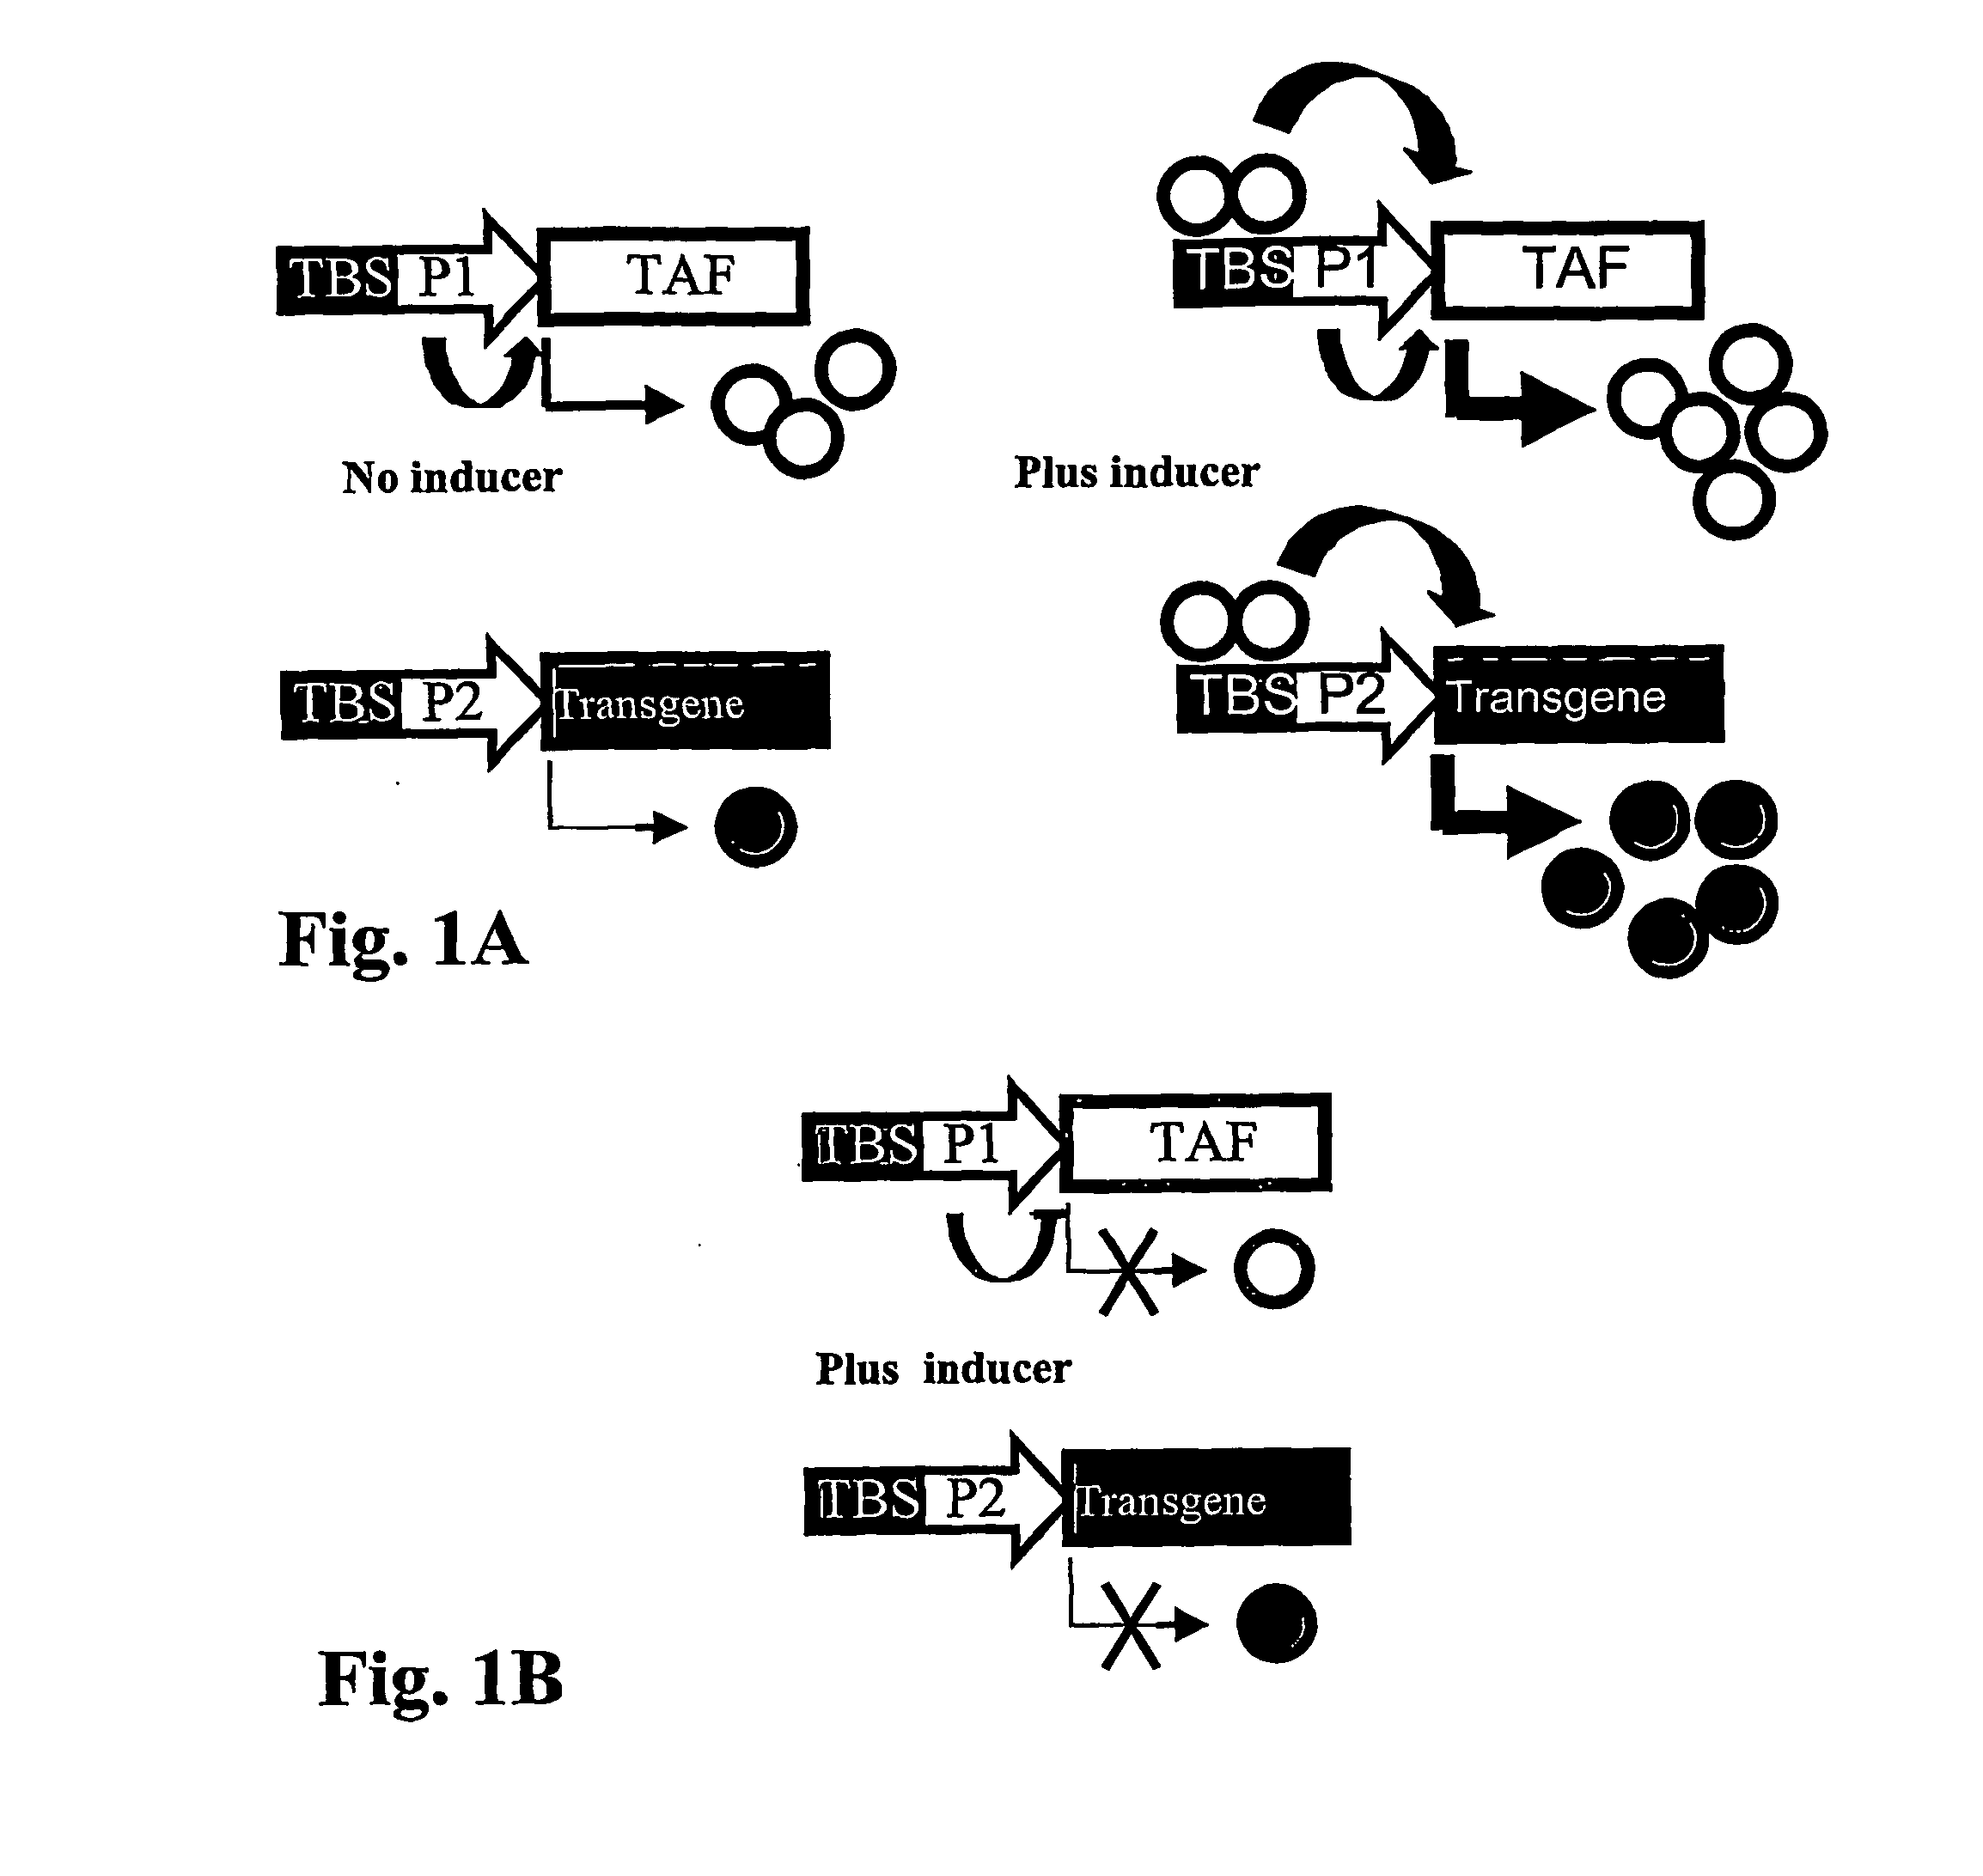 Autologous upregulation mechanism allowing optimized cell type-specific and regulated gene expression cells